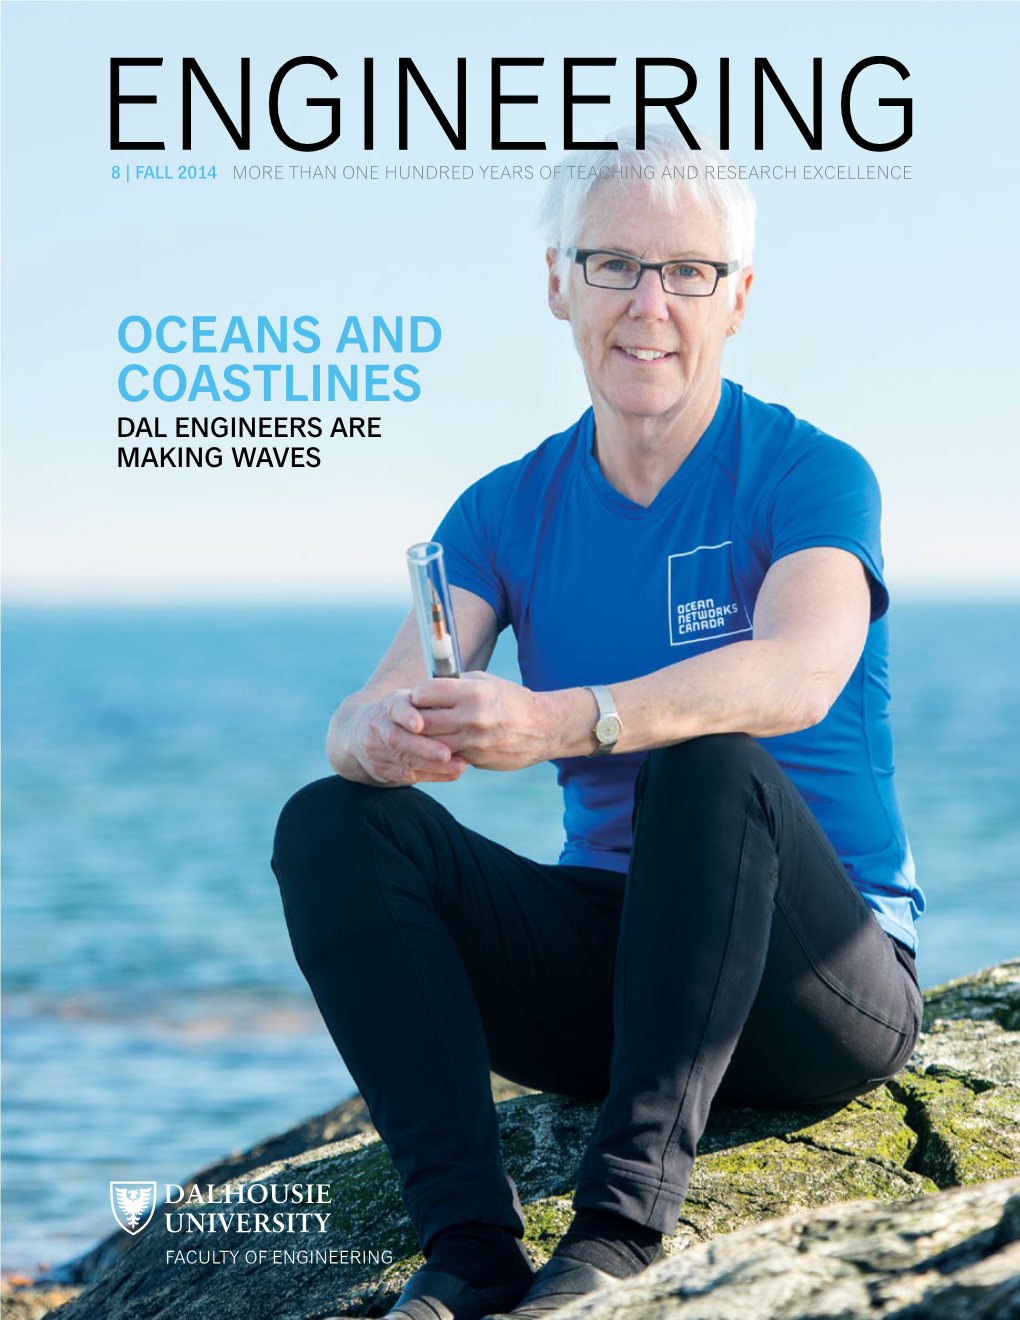 OCEANS and COASTLINES DAL ENGINEERS ARE MAKING WAVES from Her Passion for Oceans the DEAN Runs Deep the Past Year Has Been a Tremendous One for Dal Engineering